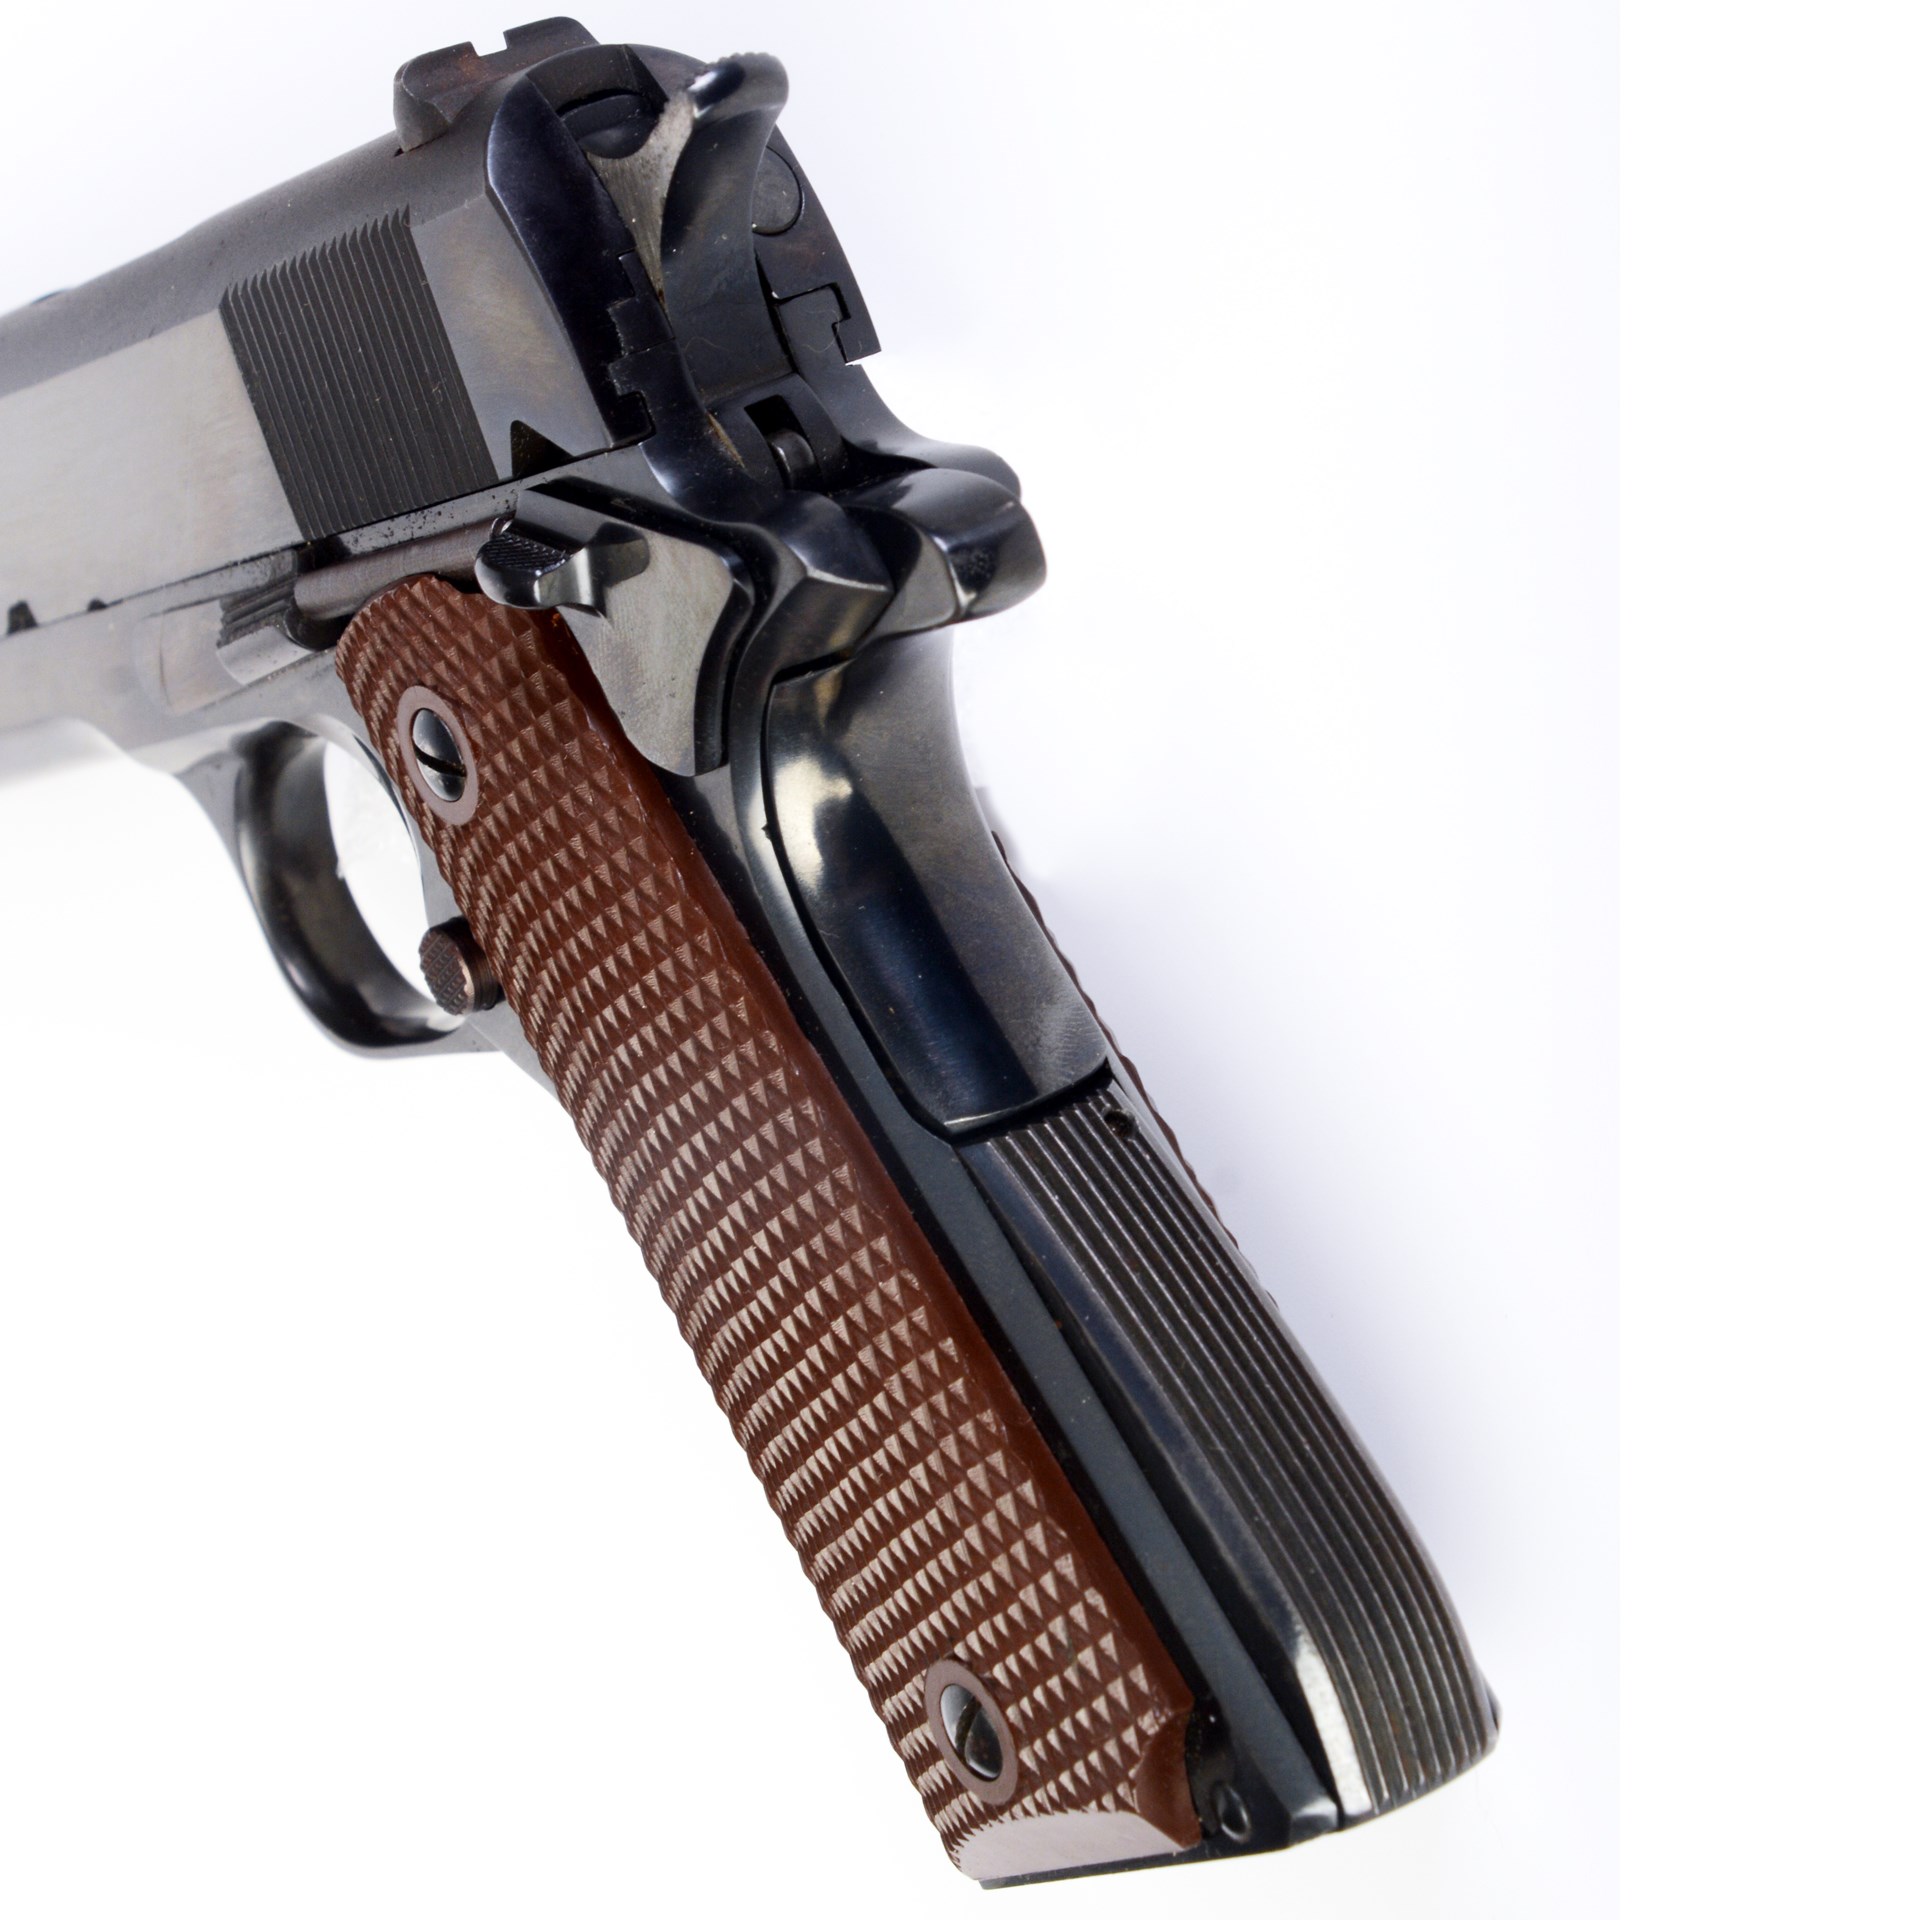 Rear view of rare colt m1911 pistol chambered for .38 Super for clandestine work military